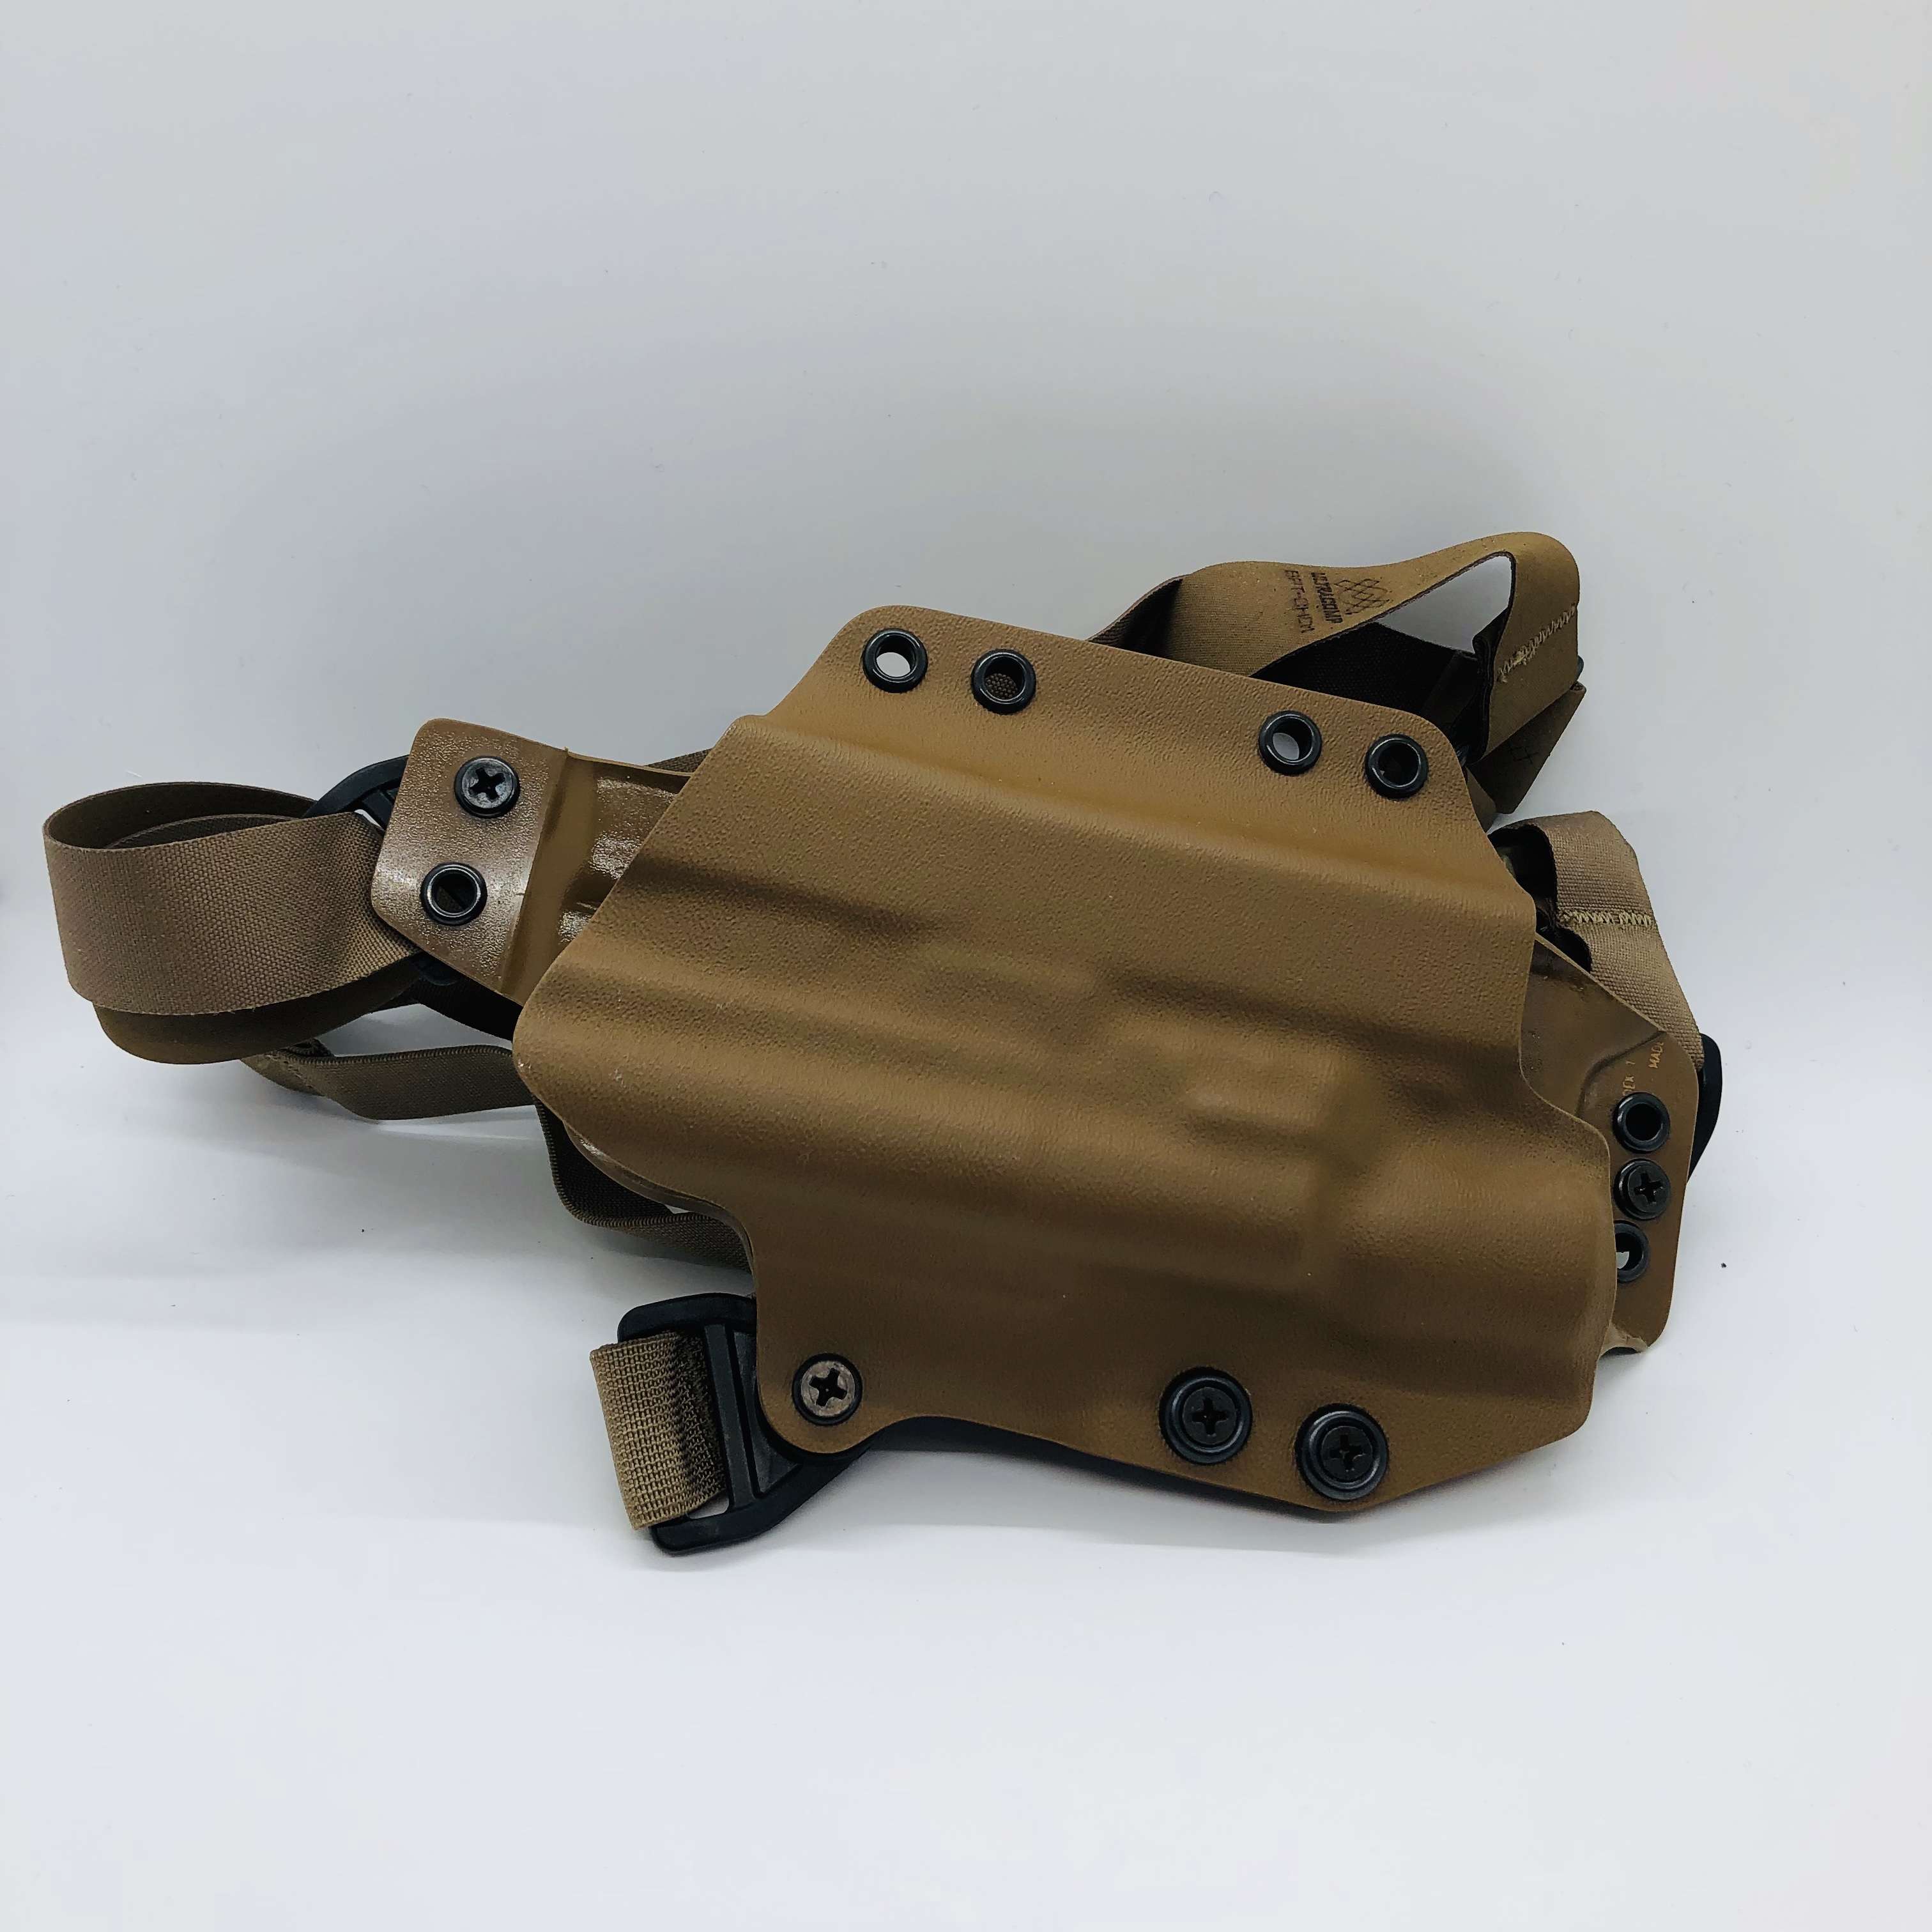 Blackpoint Tactical 114568 Outback Light Mounted Chest System Holster For Glock 20/21 Coyote Blackpoint Tactical 114568 Outback Light Mounted Chest System Holster For Glock 20/21 Coyote